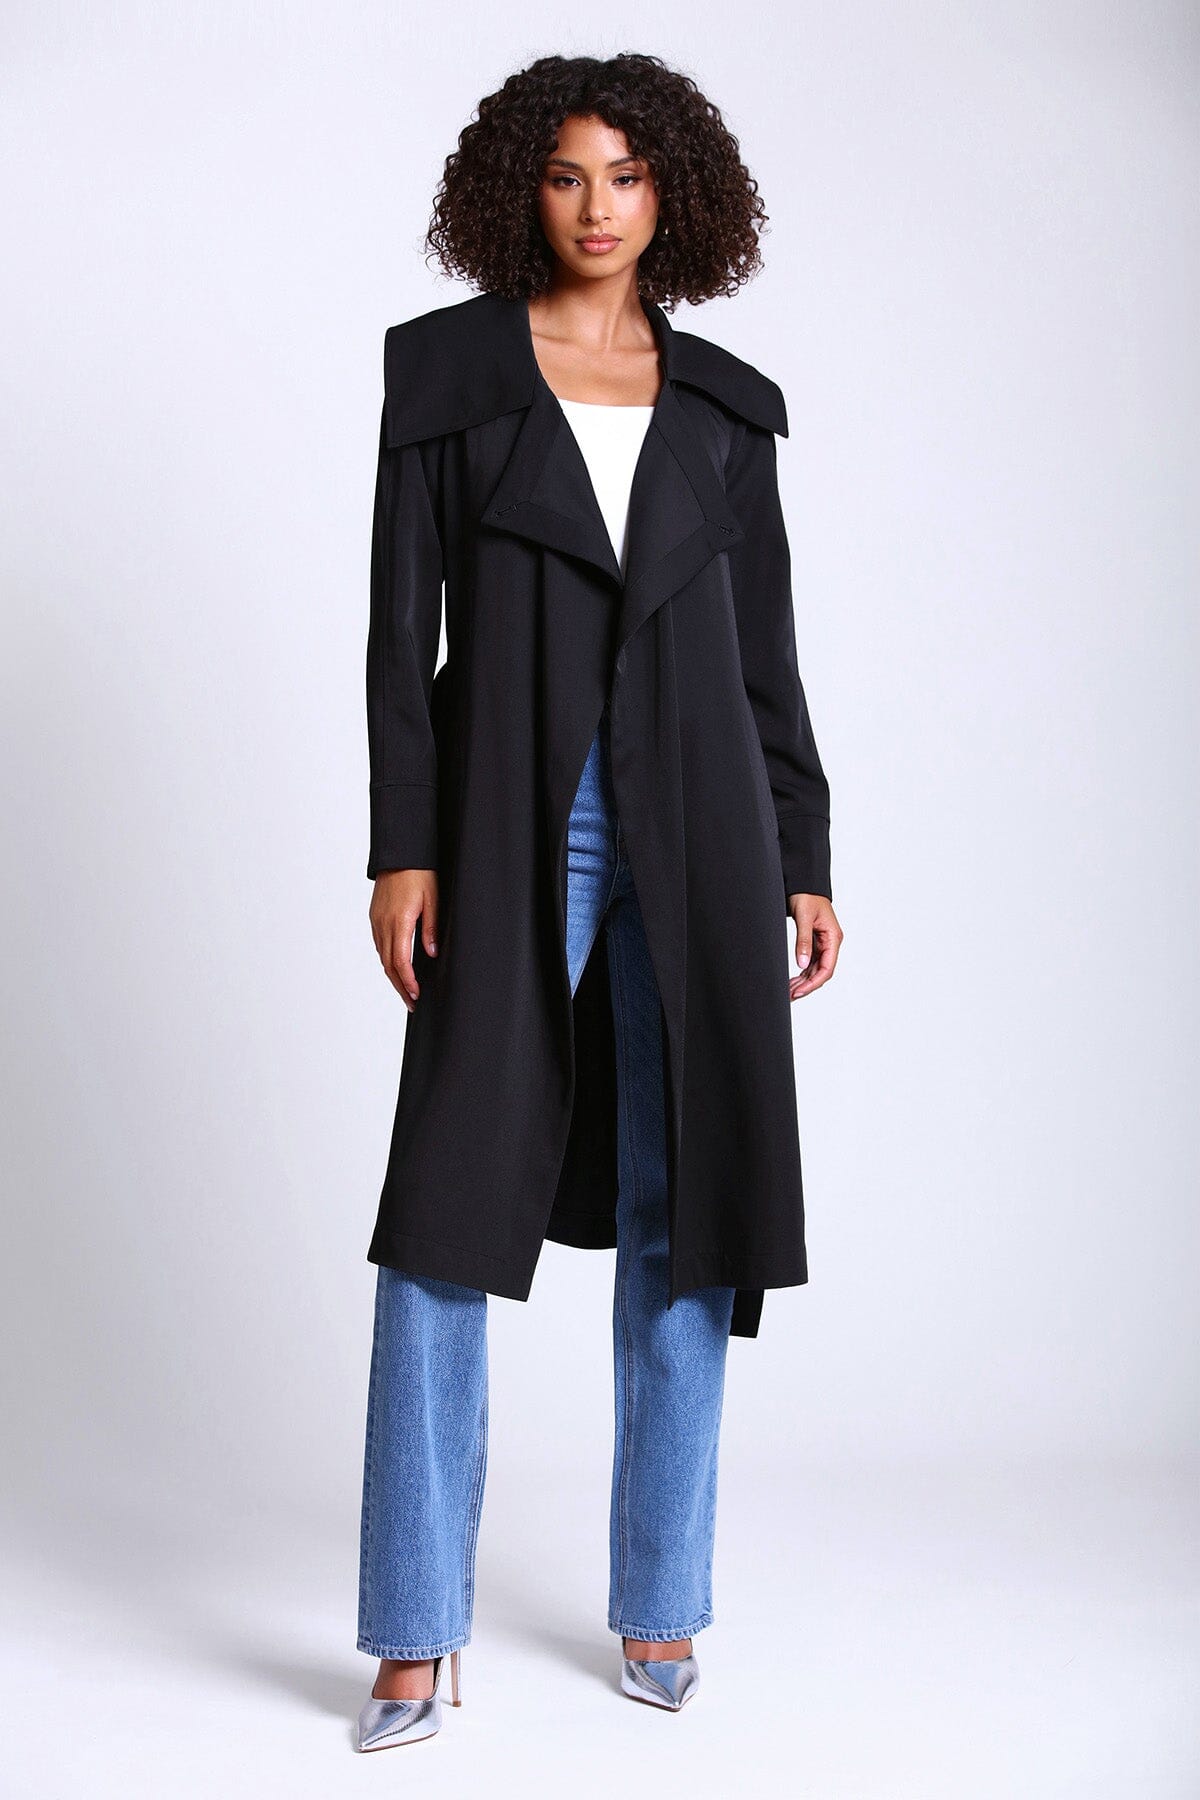 Black belted lightweight trench coat jacket - figure flattering office to date night coats for ladies